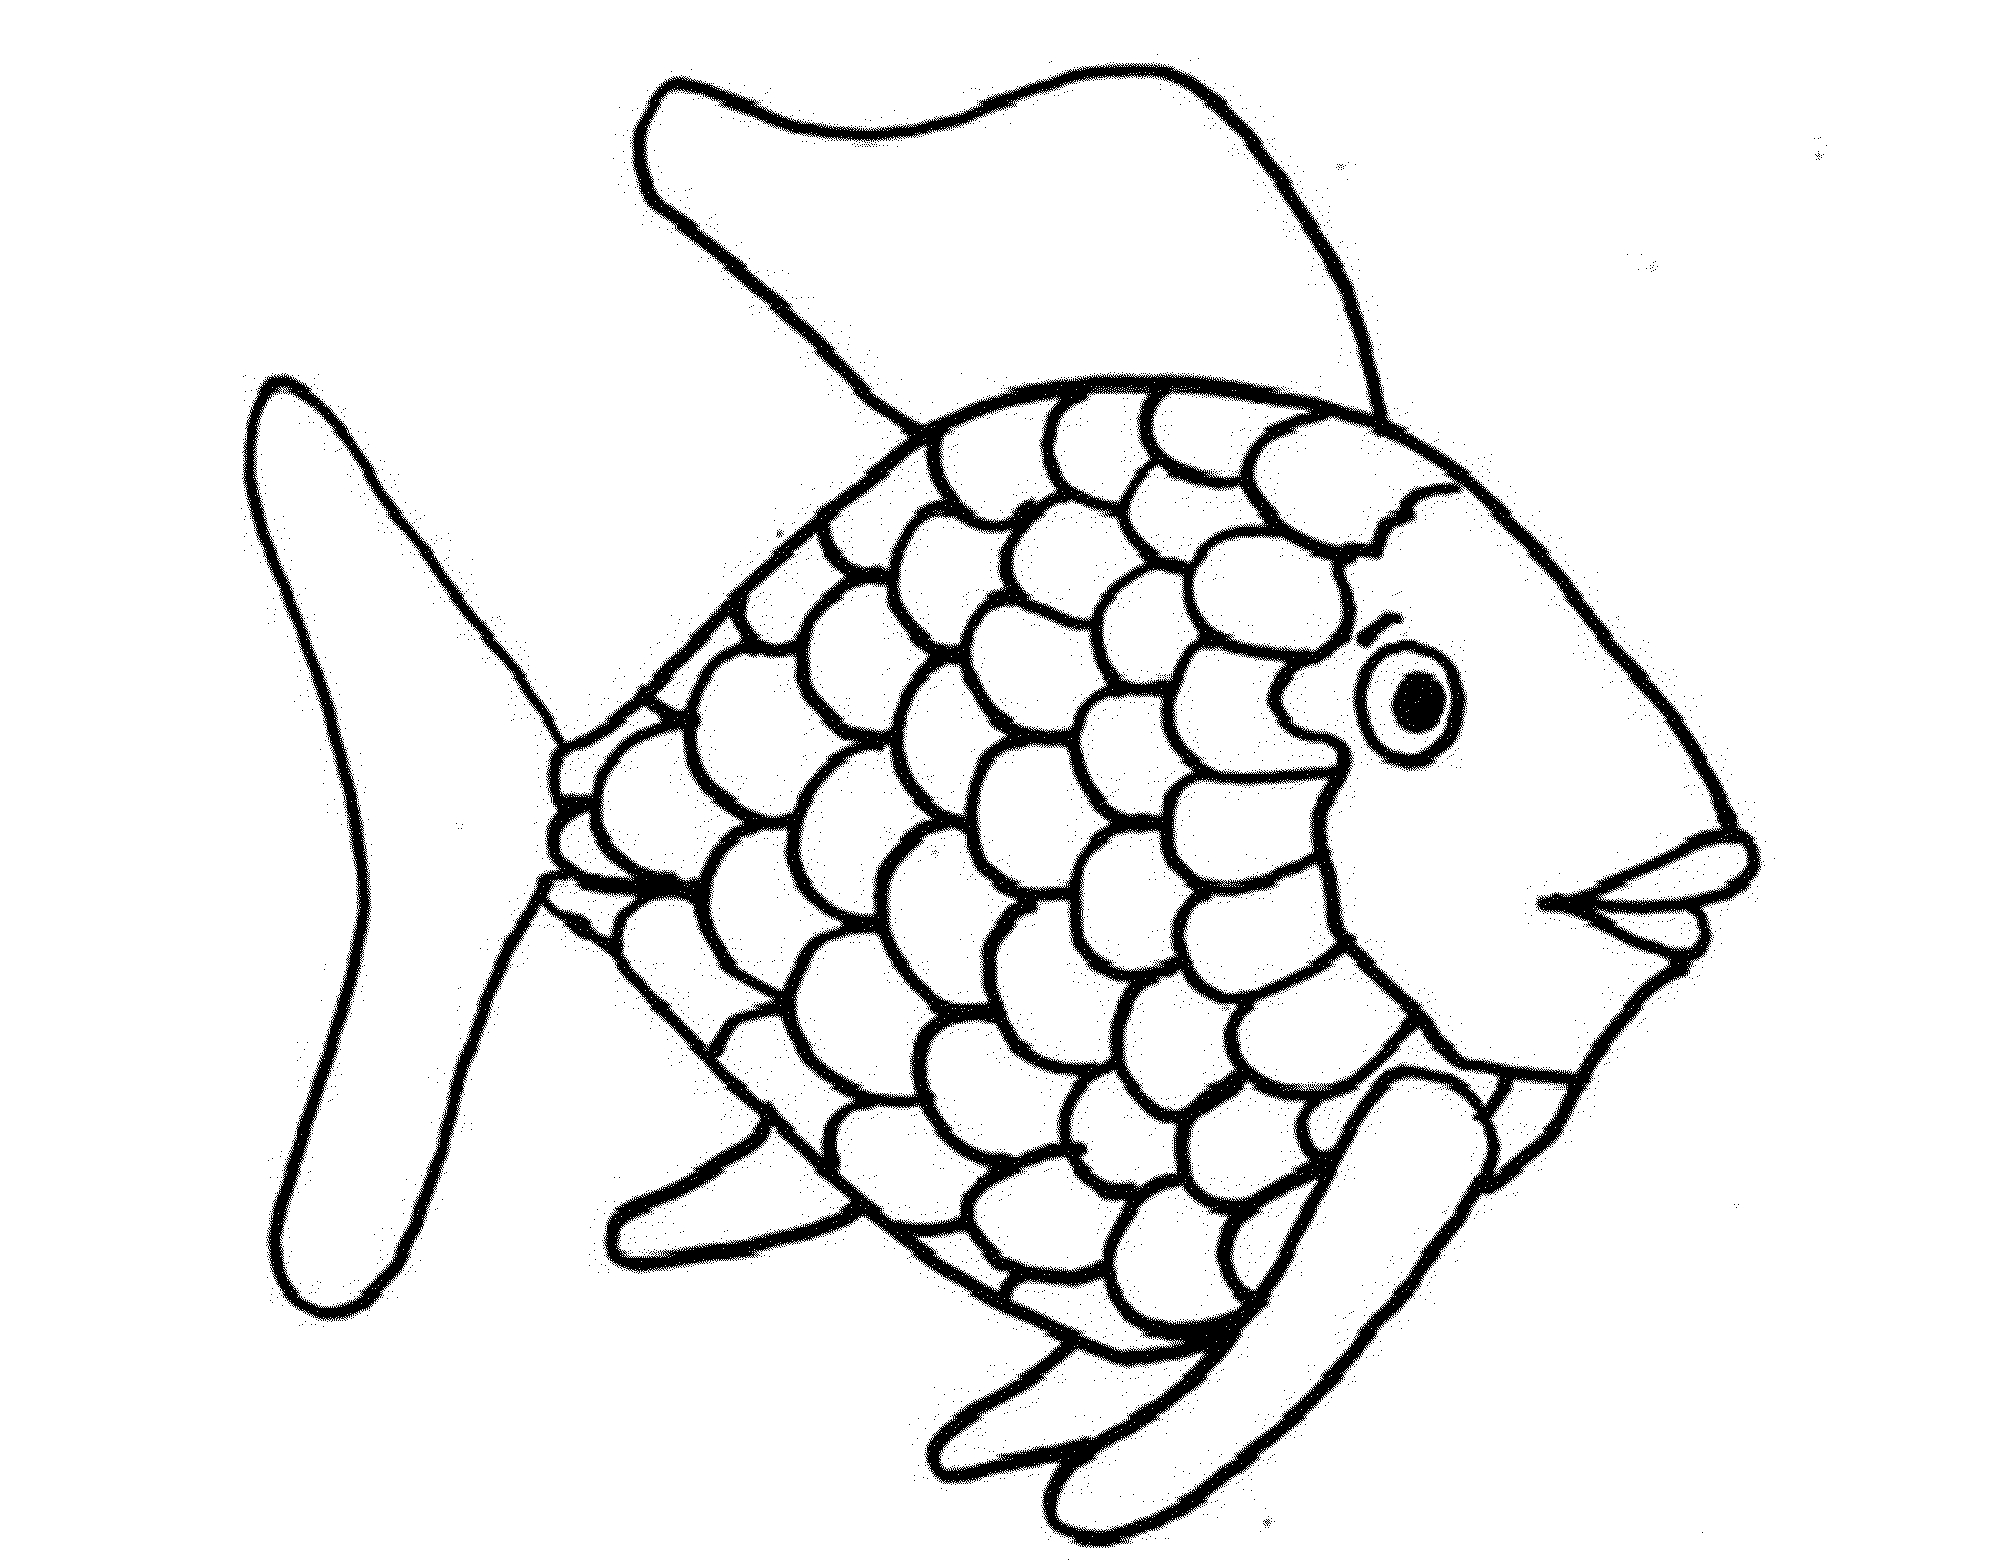 Rainbow Fish Coloring Page Template - Kids Coloring Pages